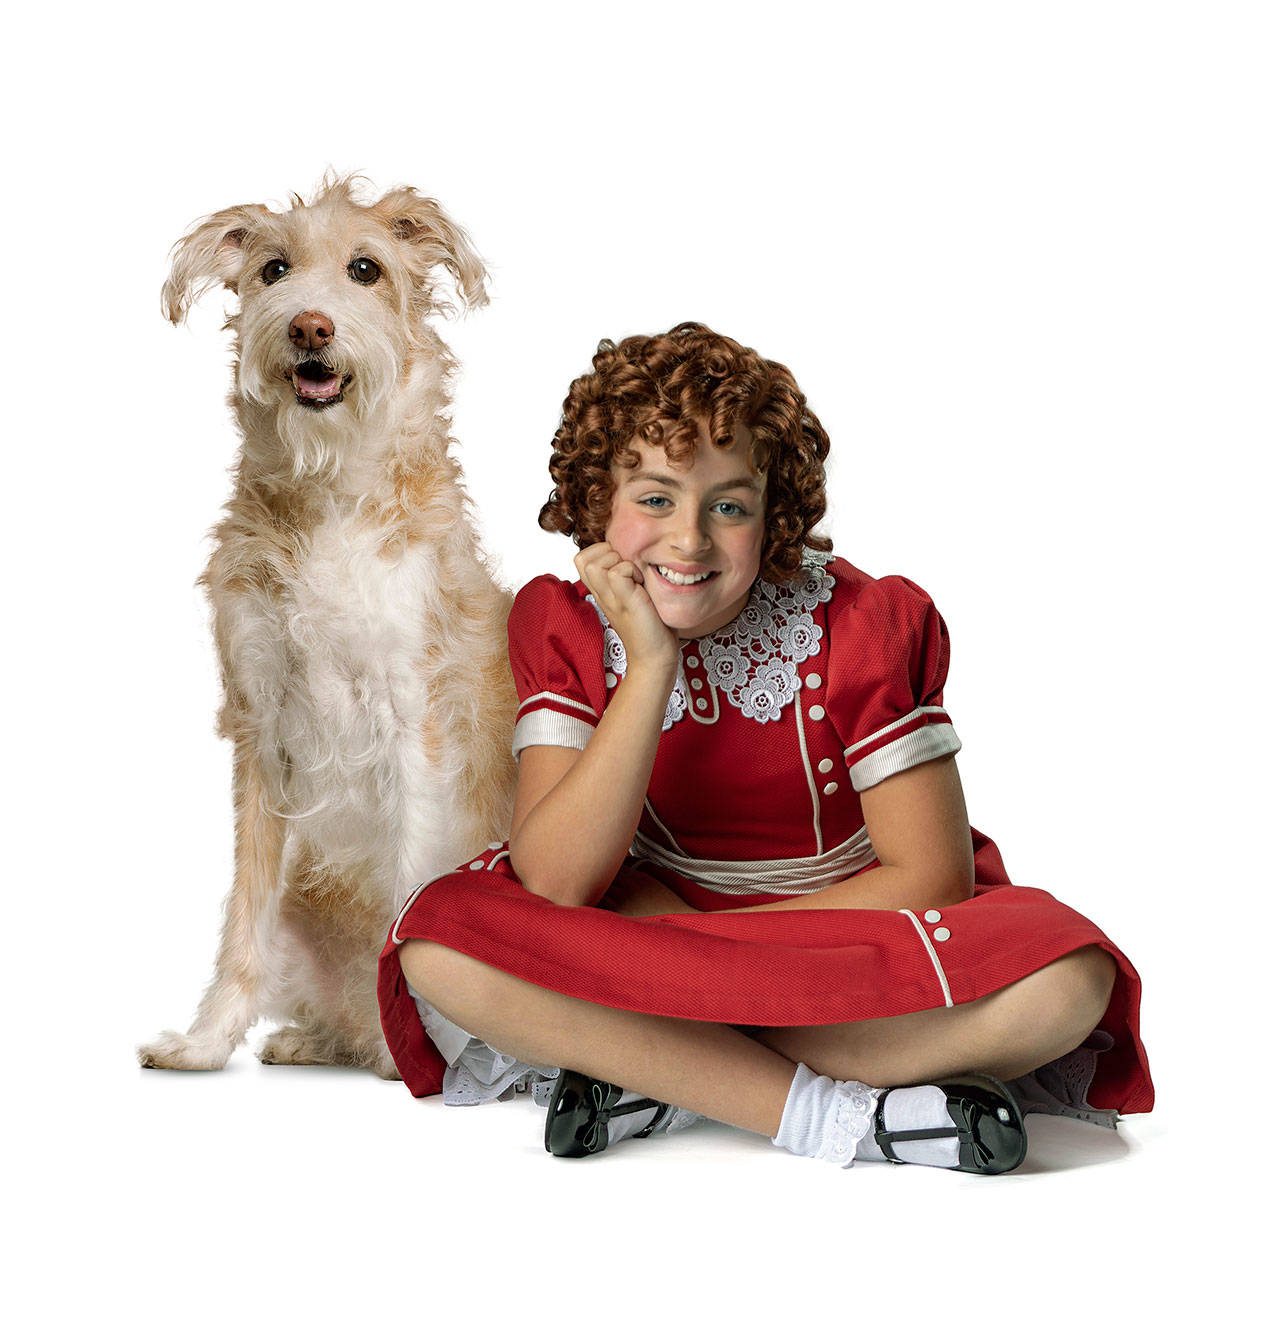 Faith Young, an 11-year-old girl from Kent, plays Annie, the orphan girl, in the 5th Avenue Theatre’s production of “Annie” this holiday season. COURTESY PHOTO, Mark Kitaoka